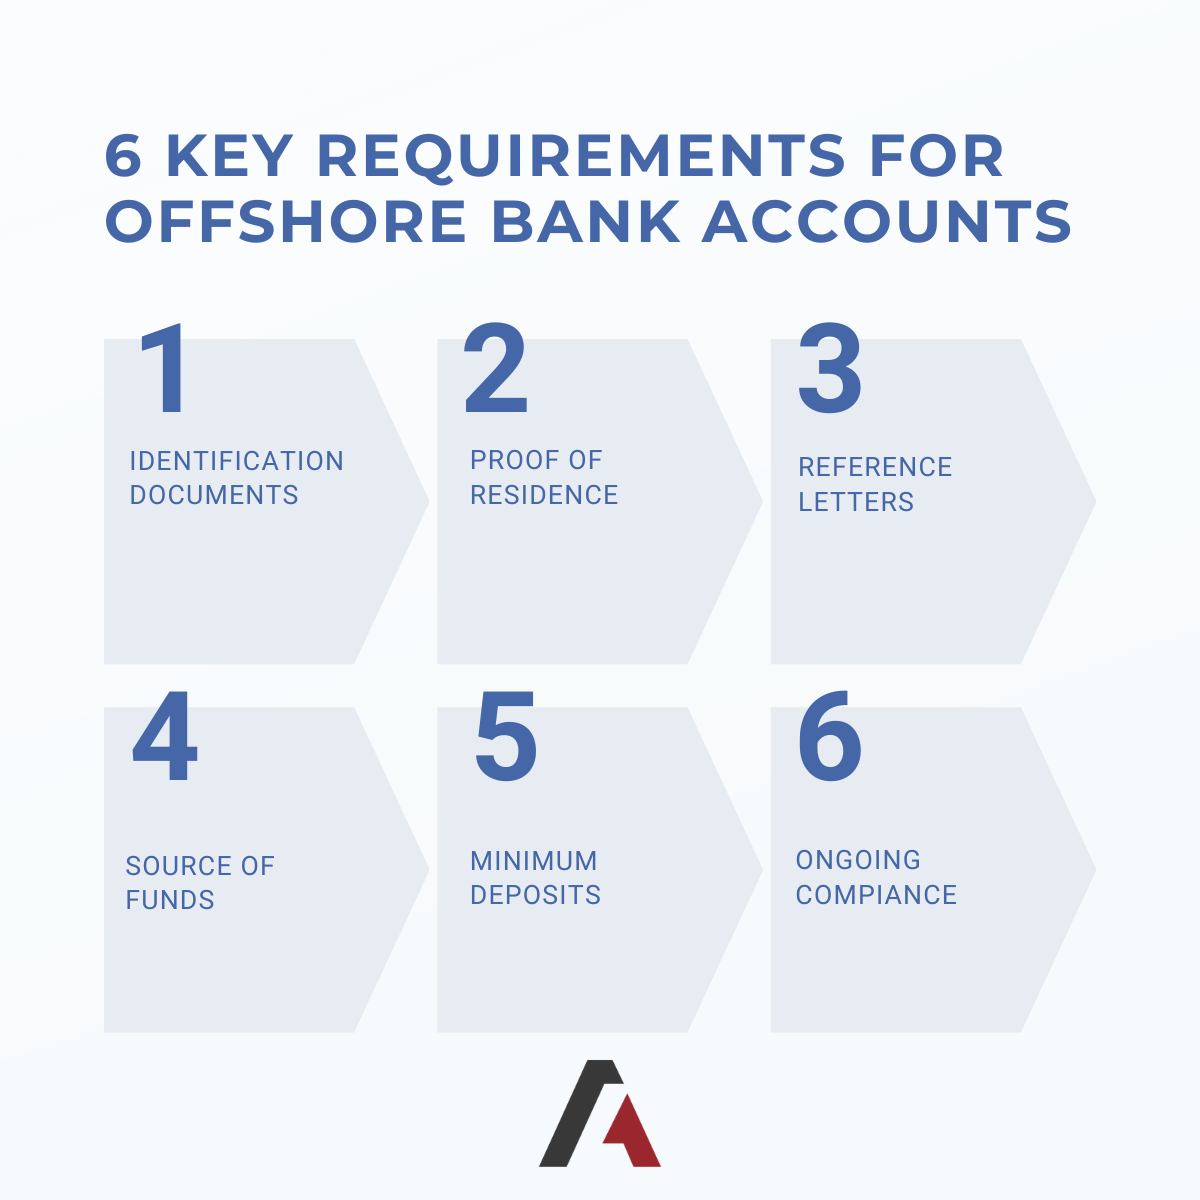 Key requirements for offshore bank accounts